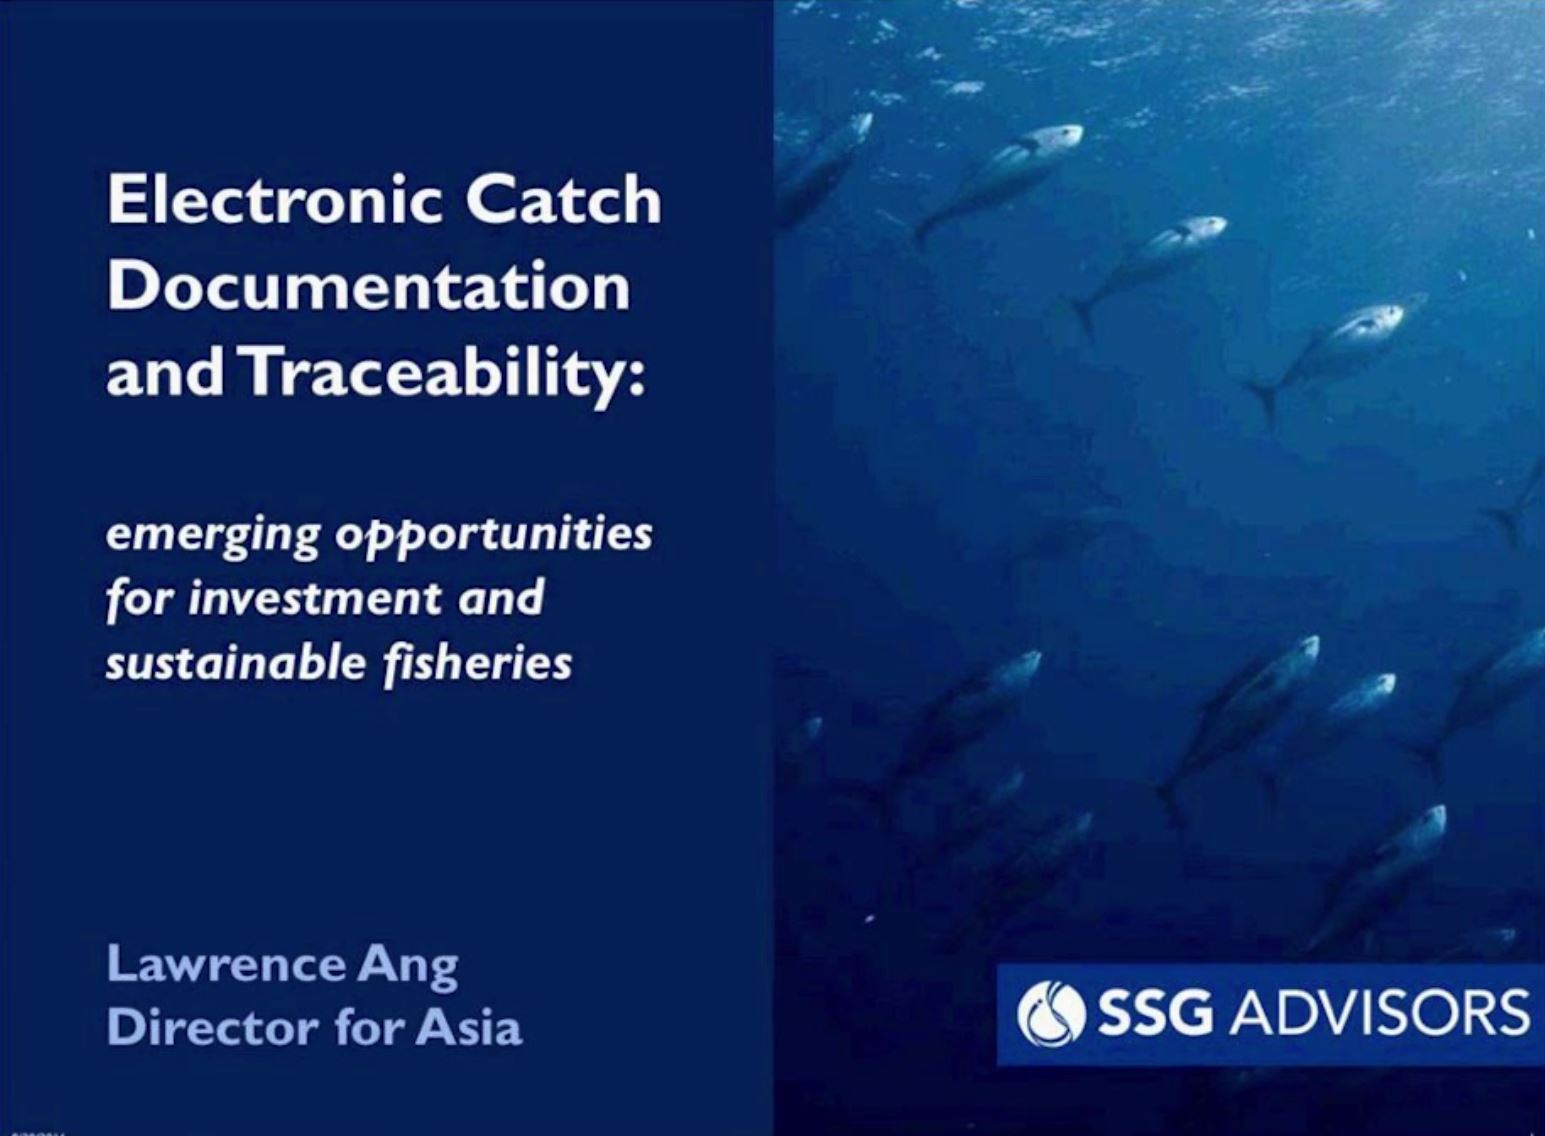 Webinar on Electronic Catch Documentation and Traceability